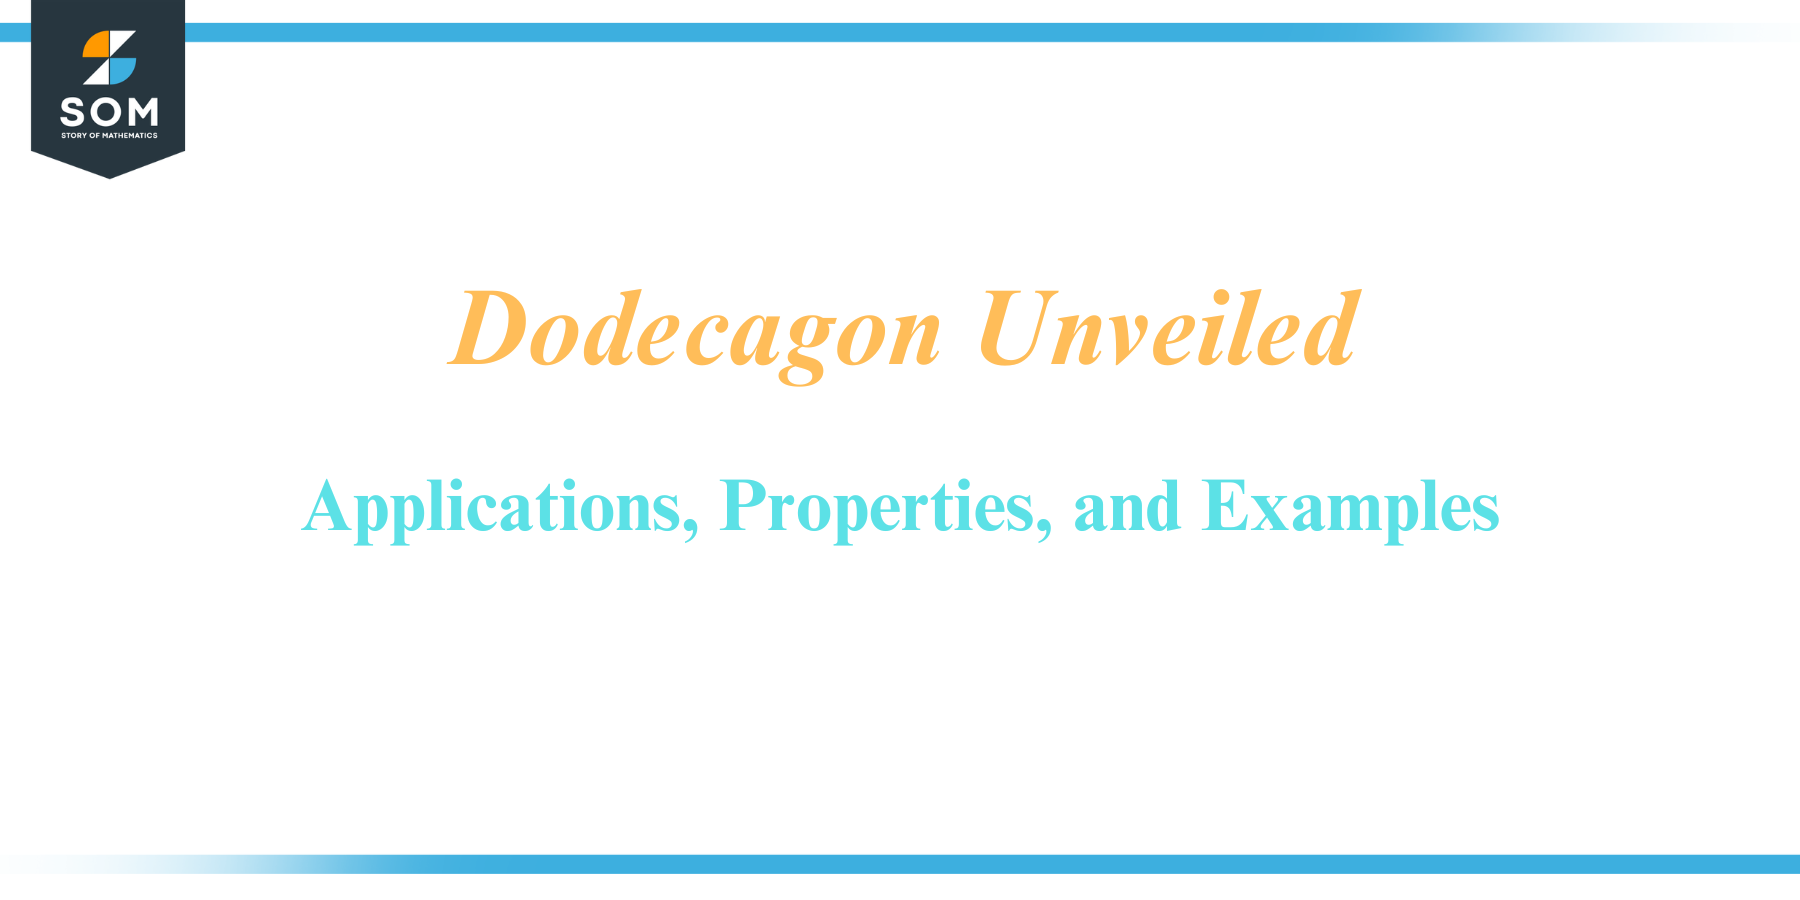 Dodecagon Unveiled Applications Properties and